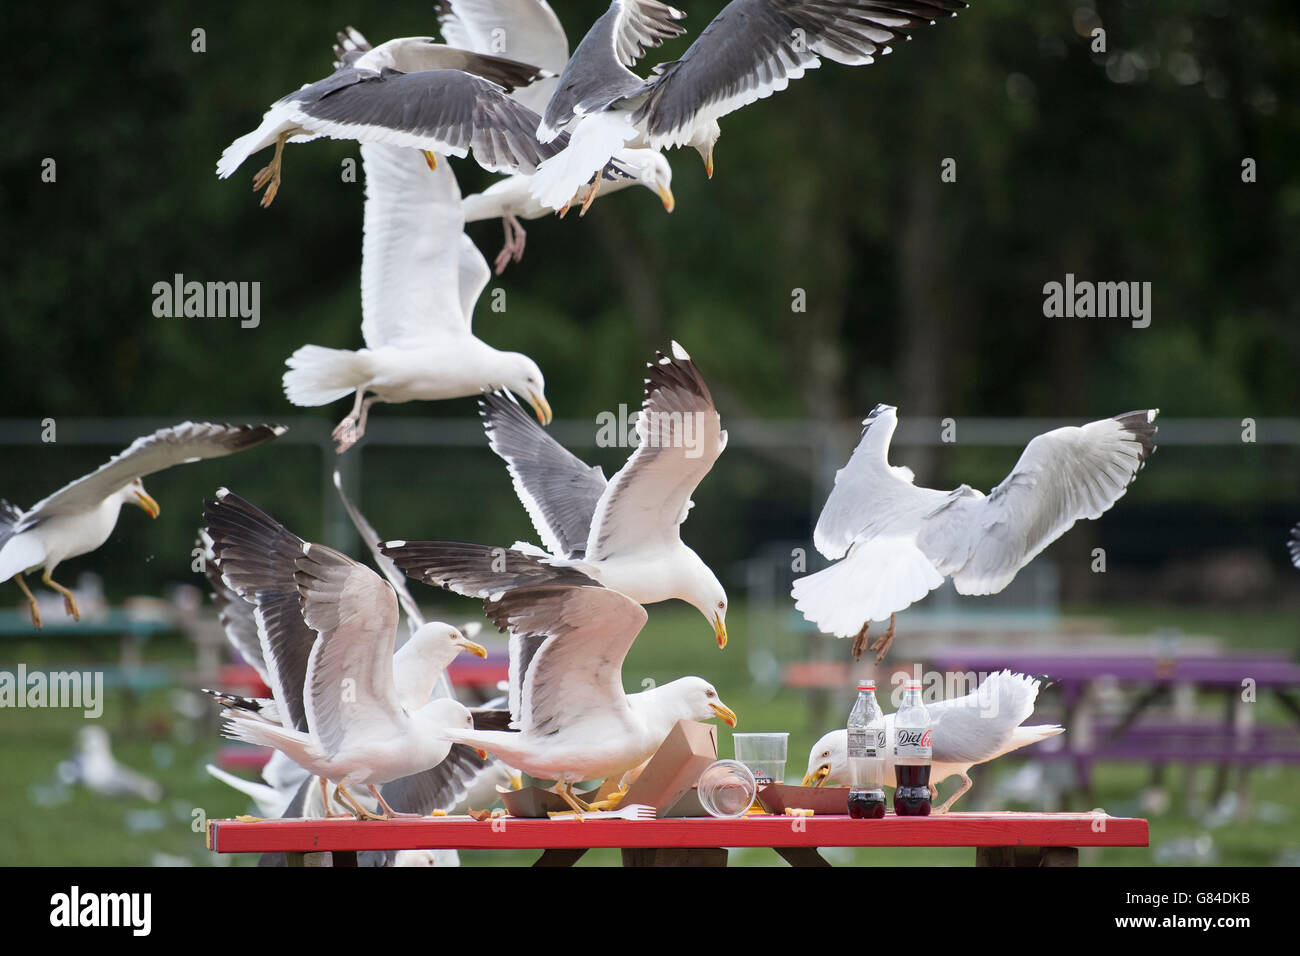 Seagulls swooping down to eat food from a picnic table. Stock Photo